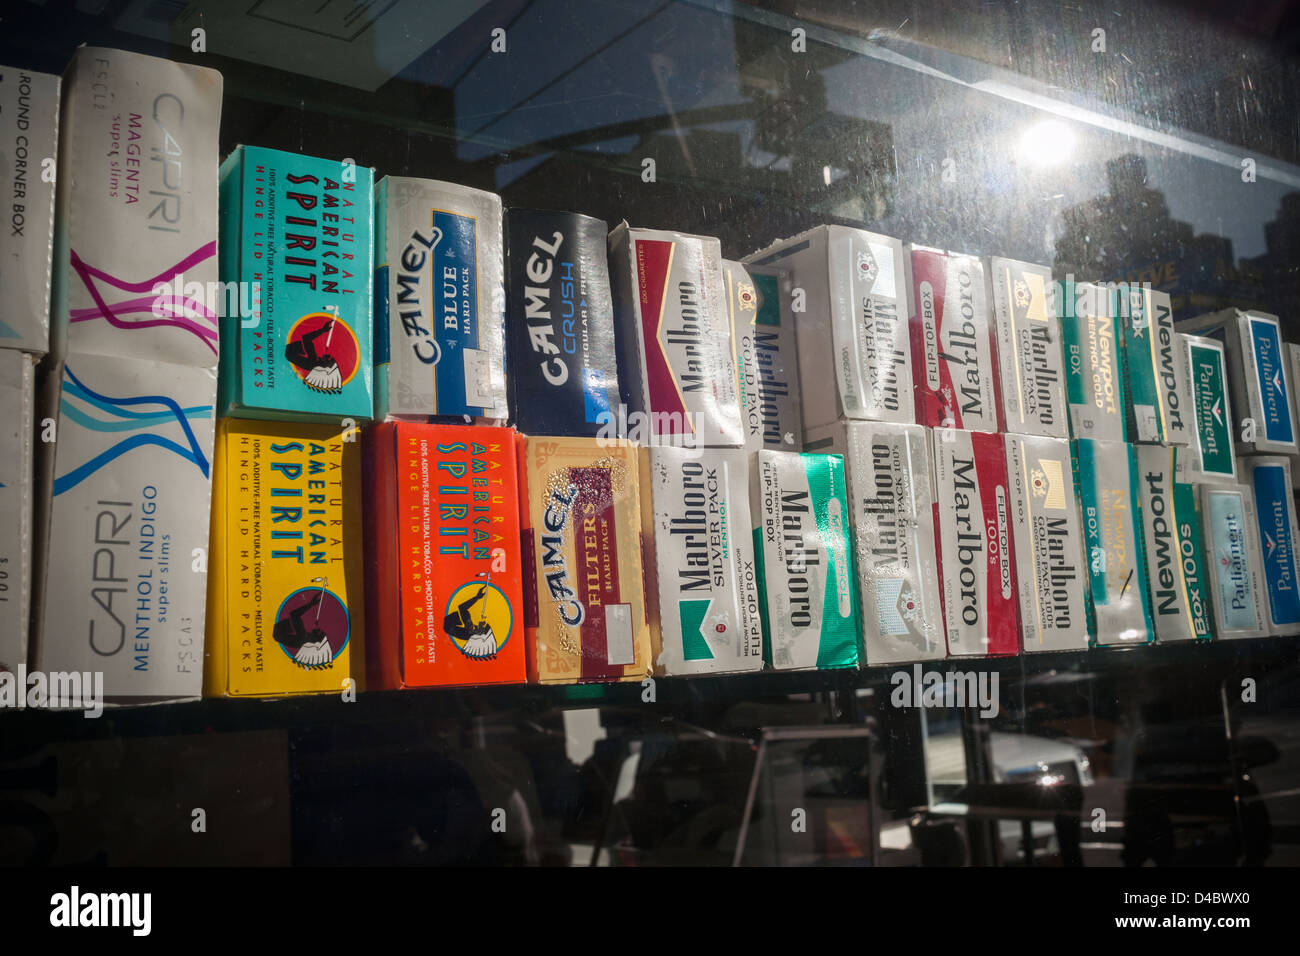 Cartons of cigarettes in the window of a grocery store in New York on Saturday, March 8, 2013. (© Richard B. Levine) Stock Photo